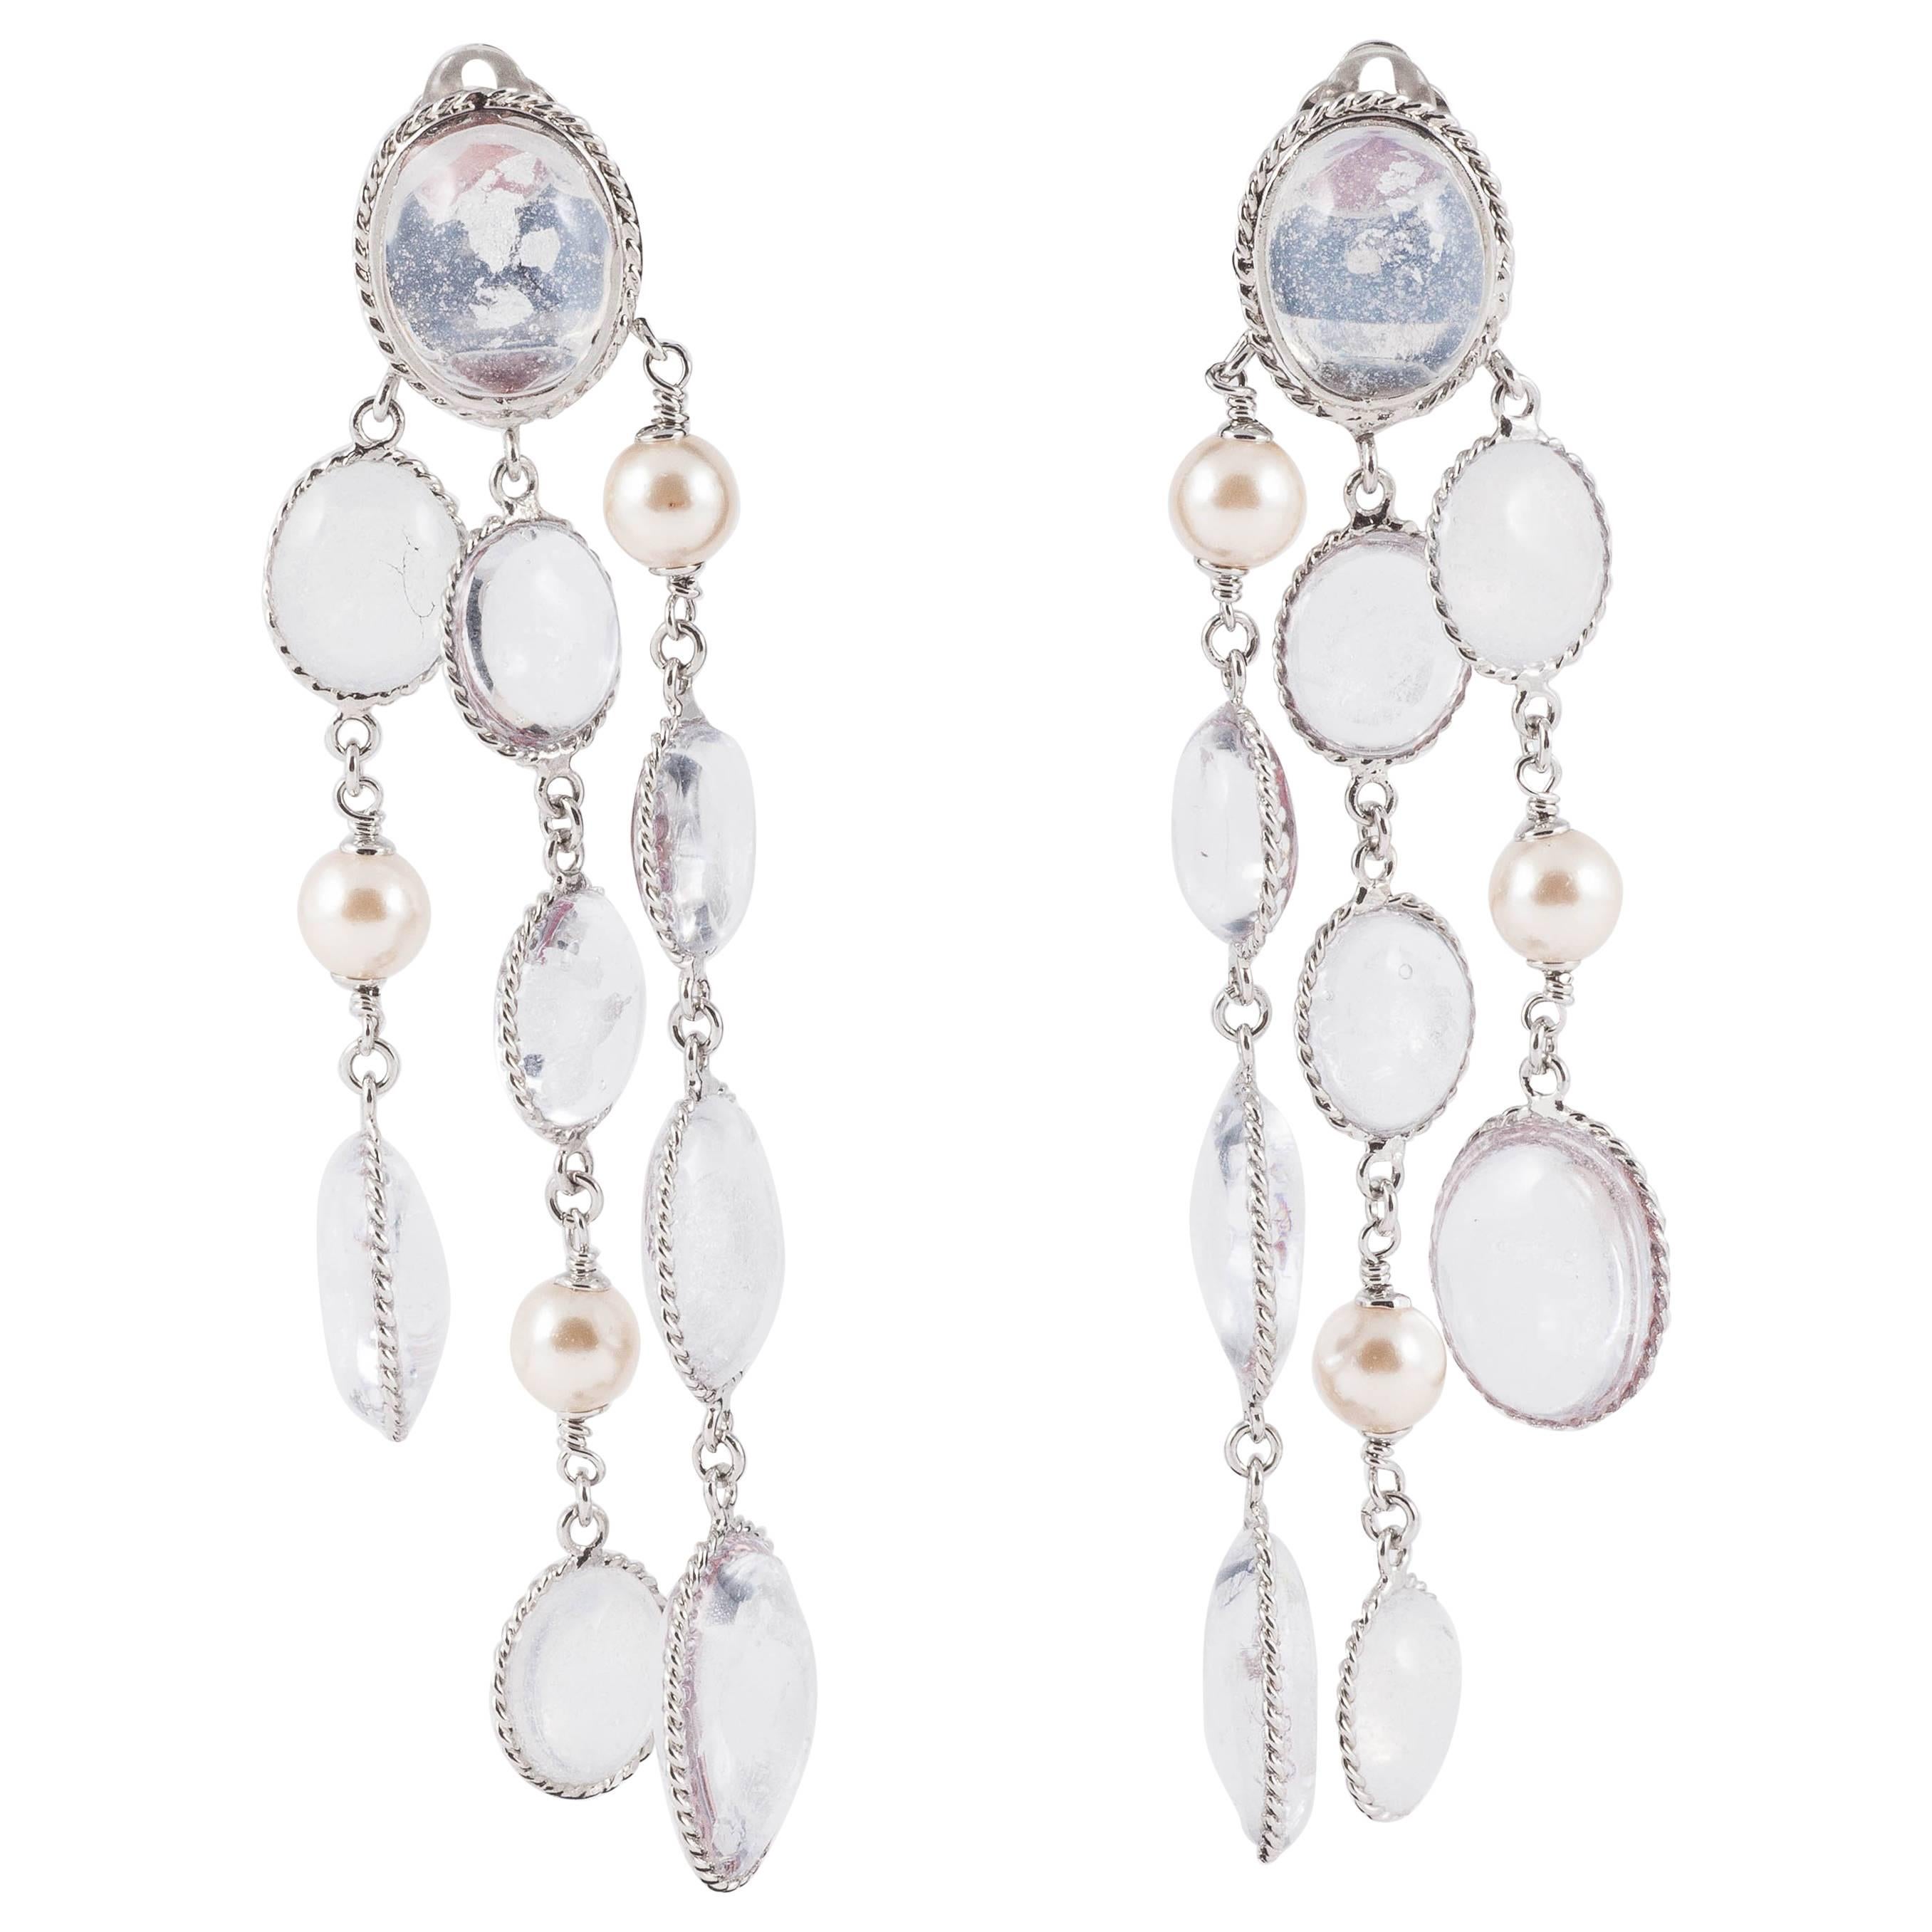 Clear poured glass and silver leaf multi strand drop earrings, WW Collection. For Sale